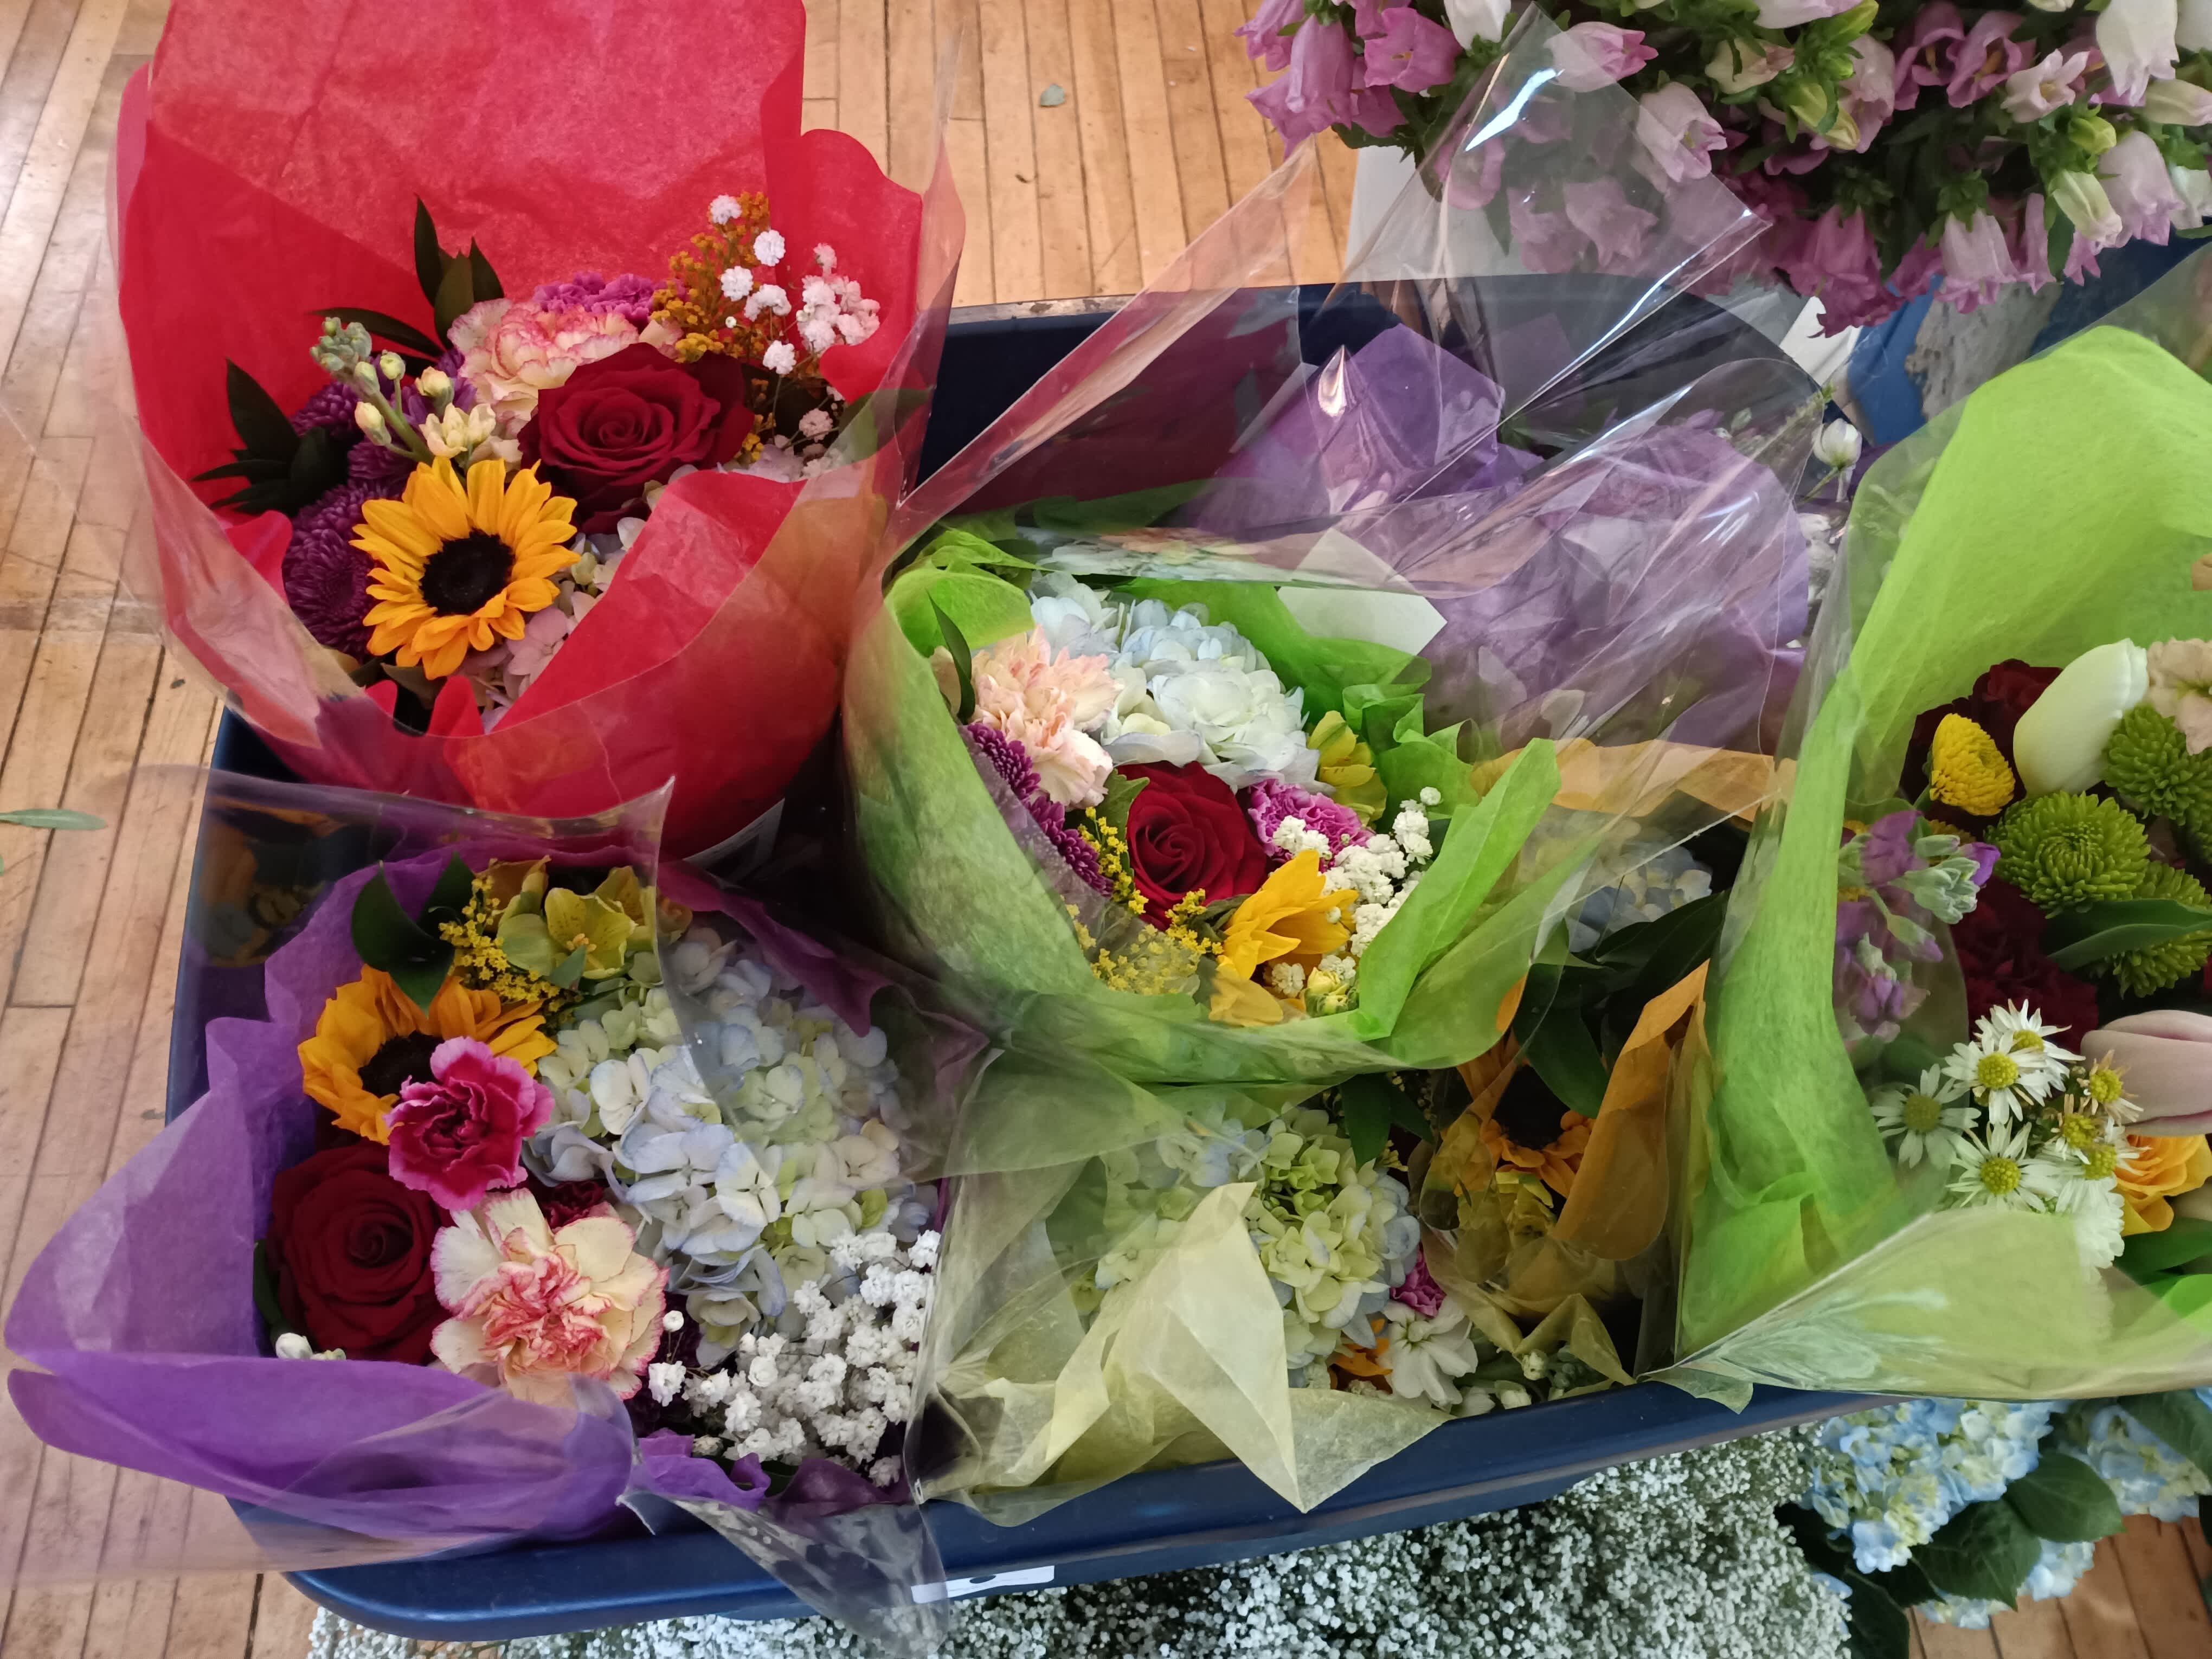 'Ready to go&quot; assorted wrap - Mix of assorted fresh flowers including hydrangea, rose, alstroemeria, stuck, daisies, baby's breath and g5reens in a tissue paper and cellophane sleave 